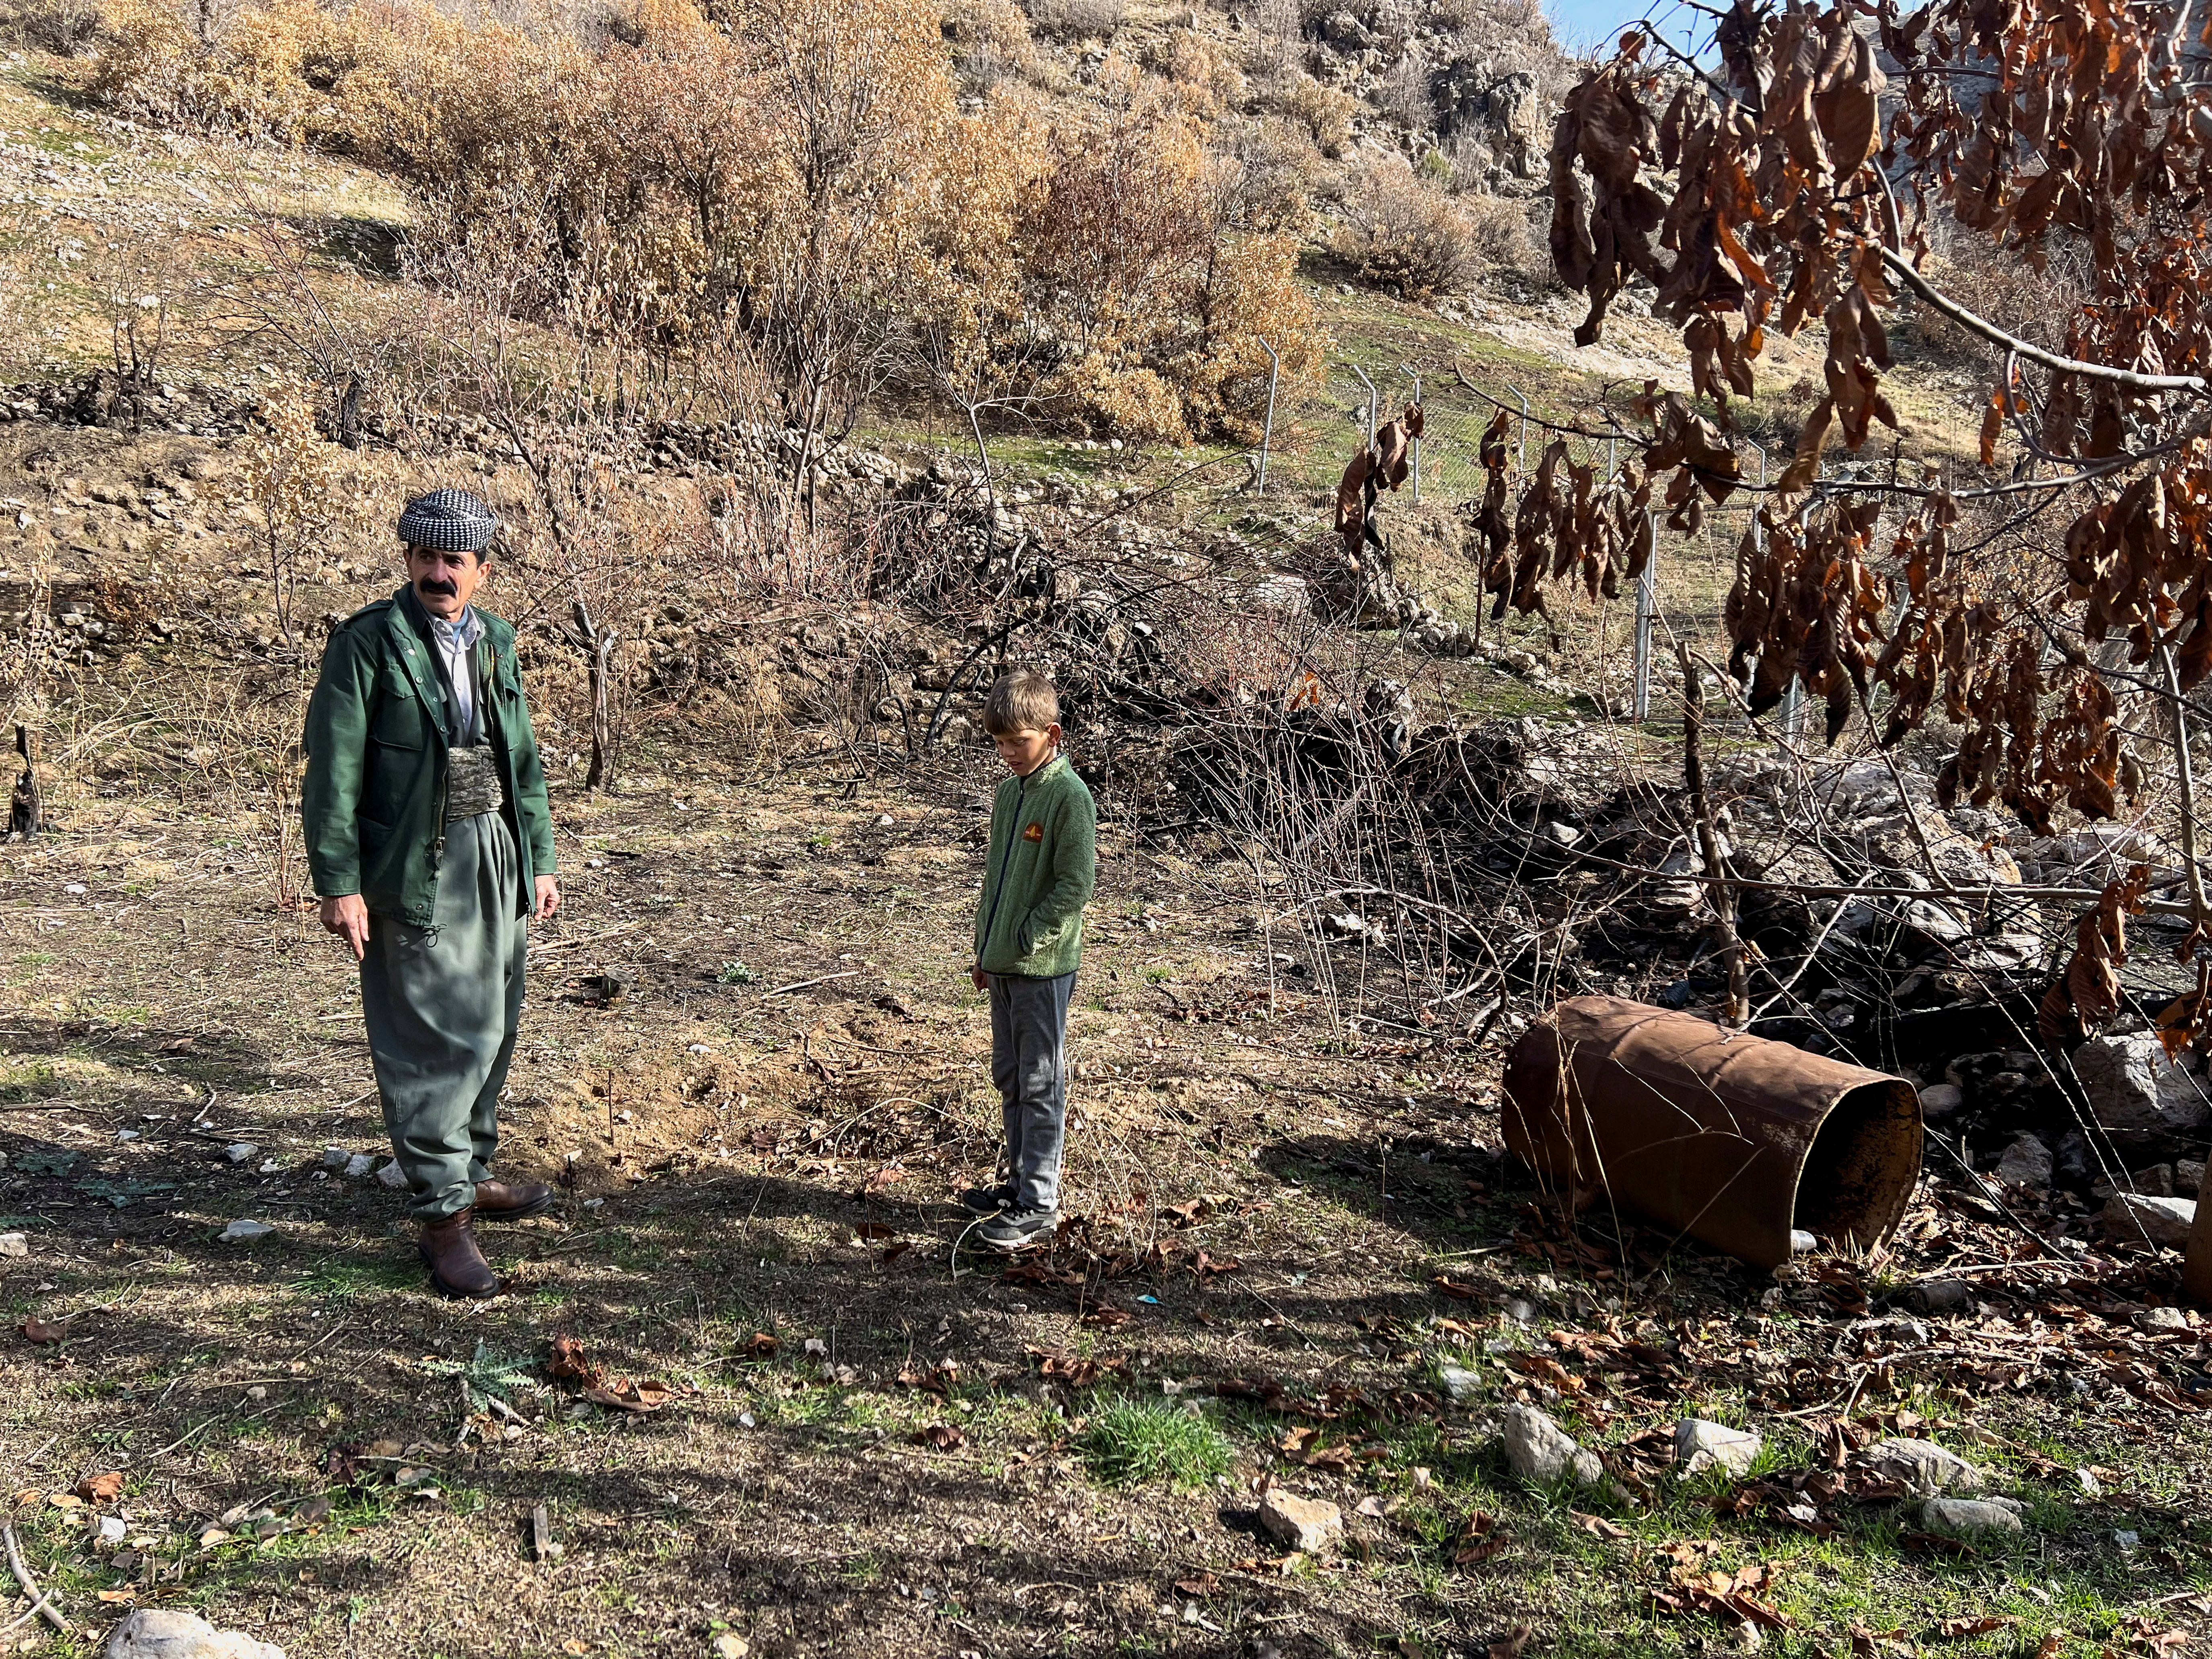 Omar Abdullah Qasim stands with his grandson in the yard next to his house in Sararo village, where he claims several rockets landed during the Turkish bombardment last year, in Dohuk